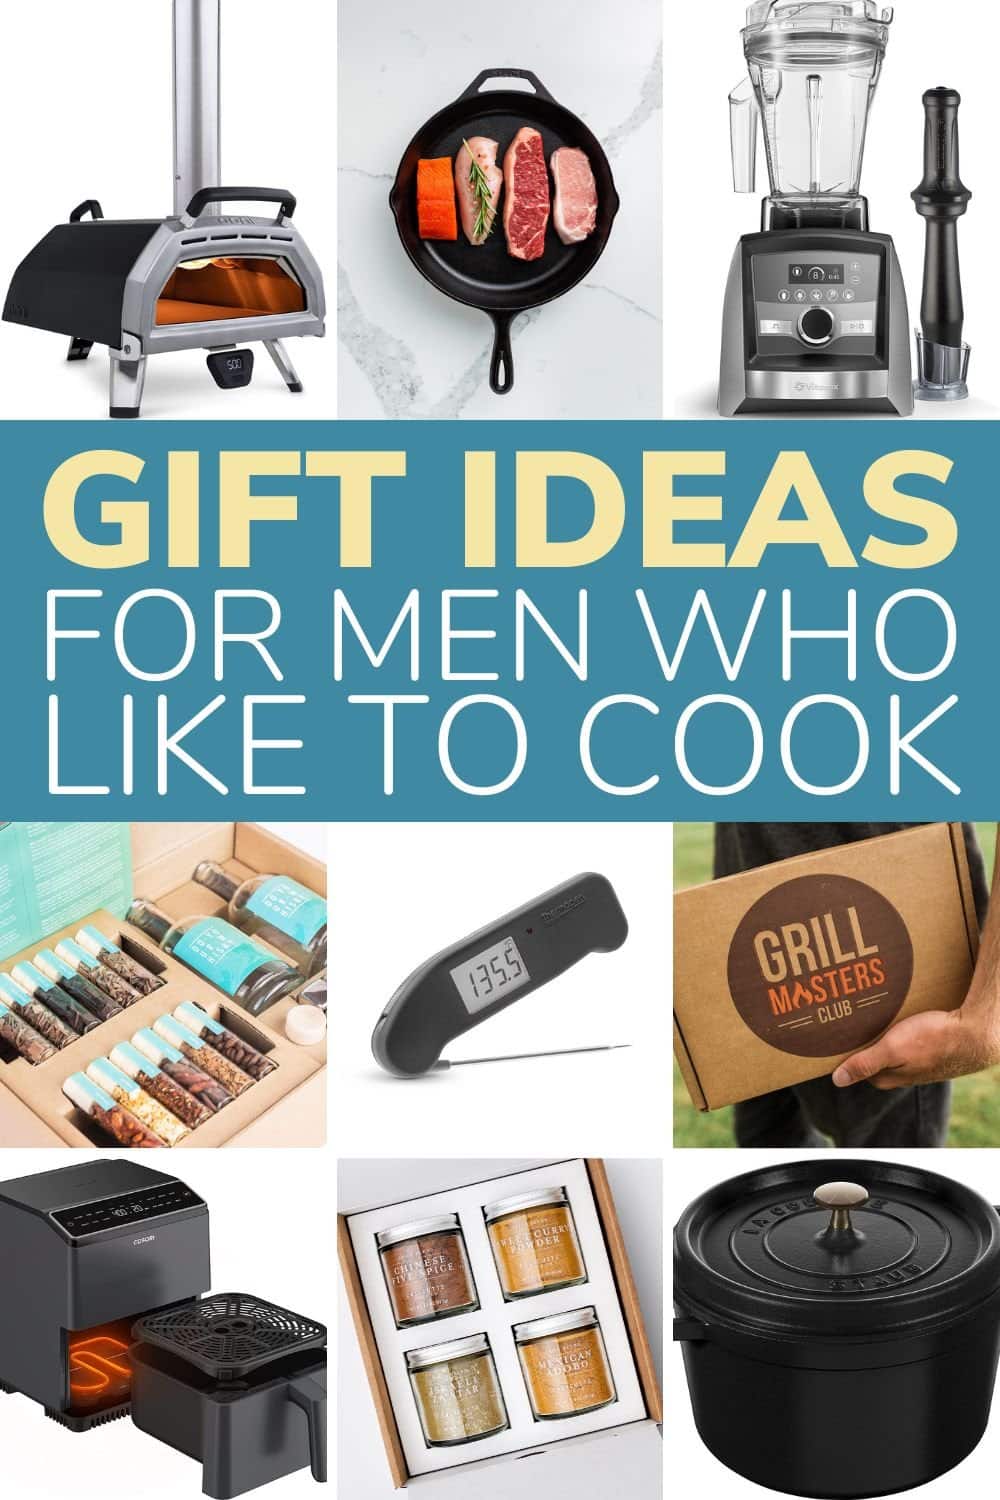 Pinterest collage graphic of gift ideas for men who like to cook.